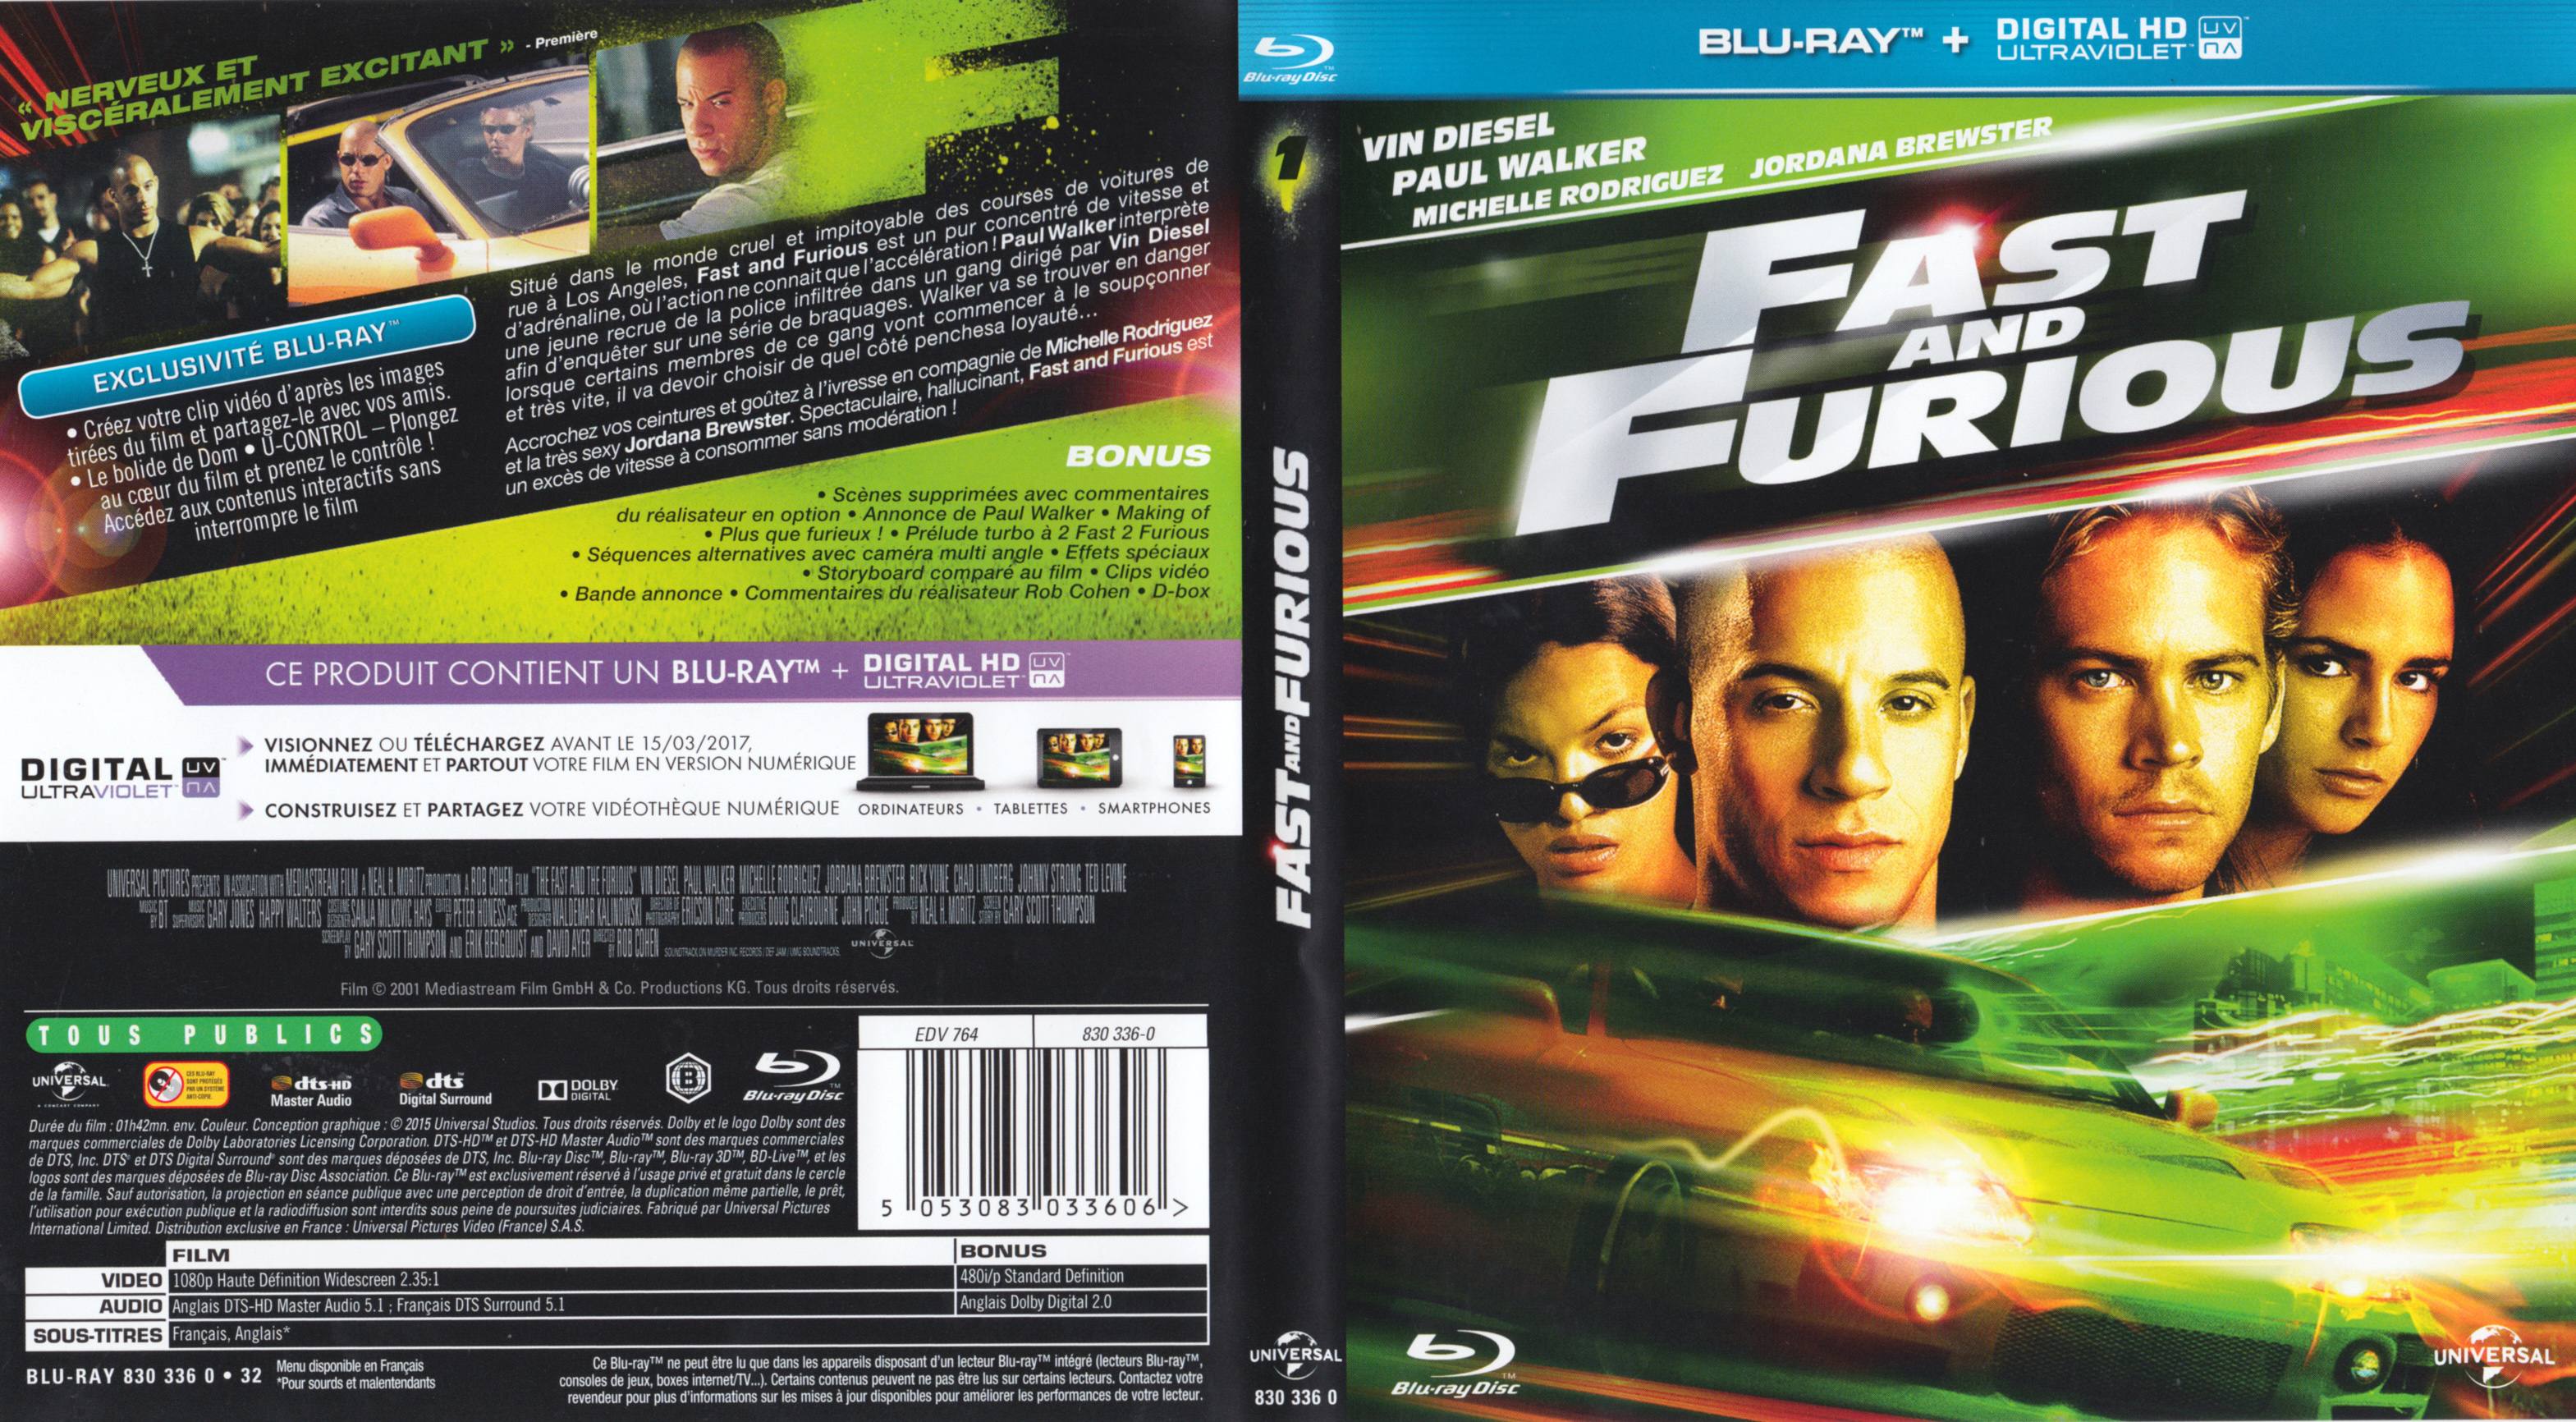 Jaquette DVD Fast and furious (BLU-RAY) v3